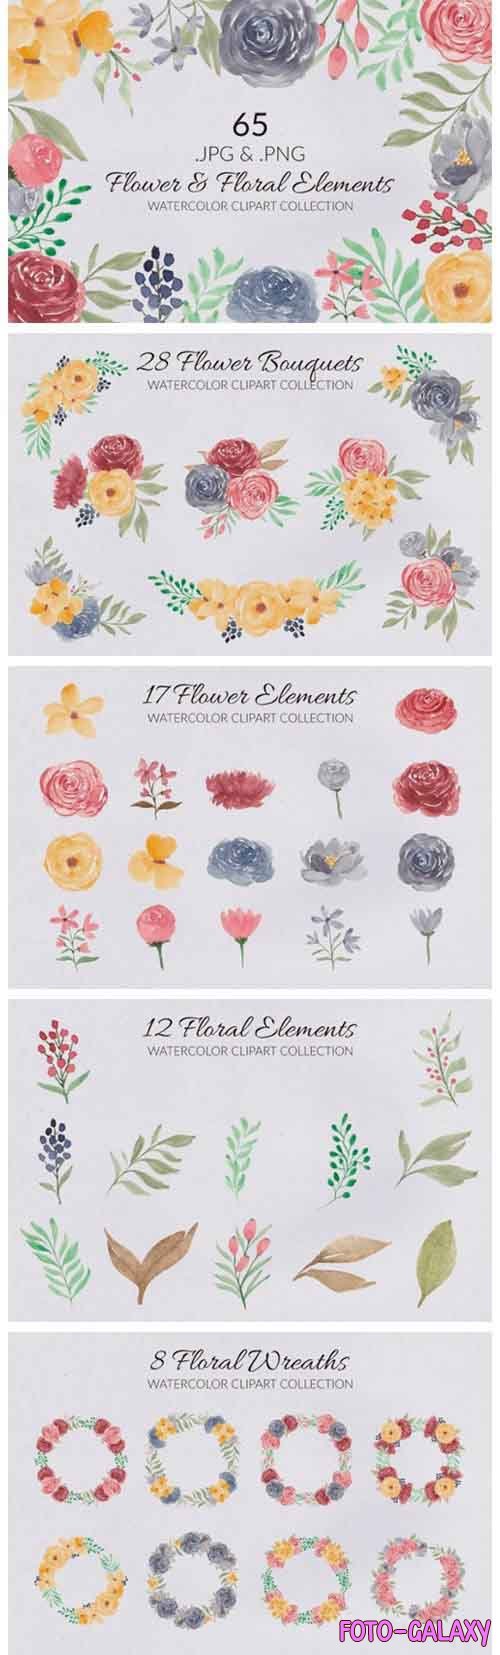 65 Flower and Floral Watercolor Illustration Clip Art - 591798